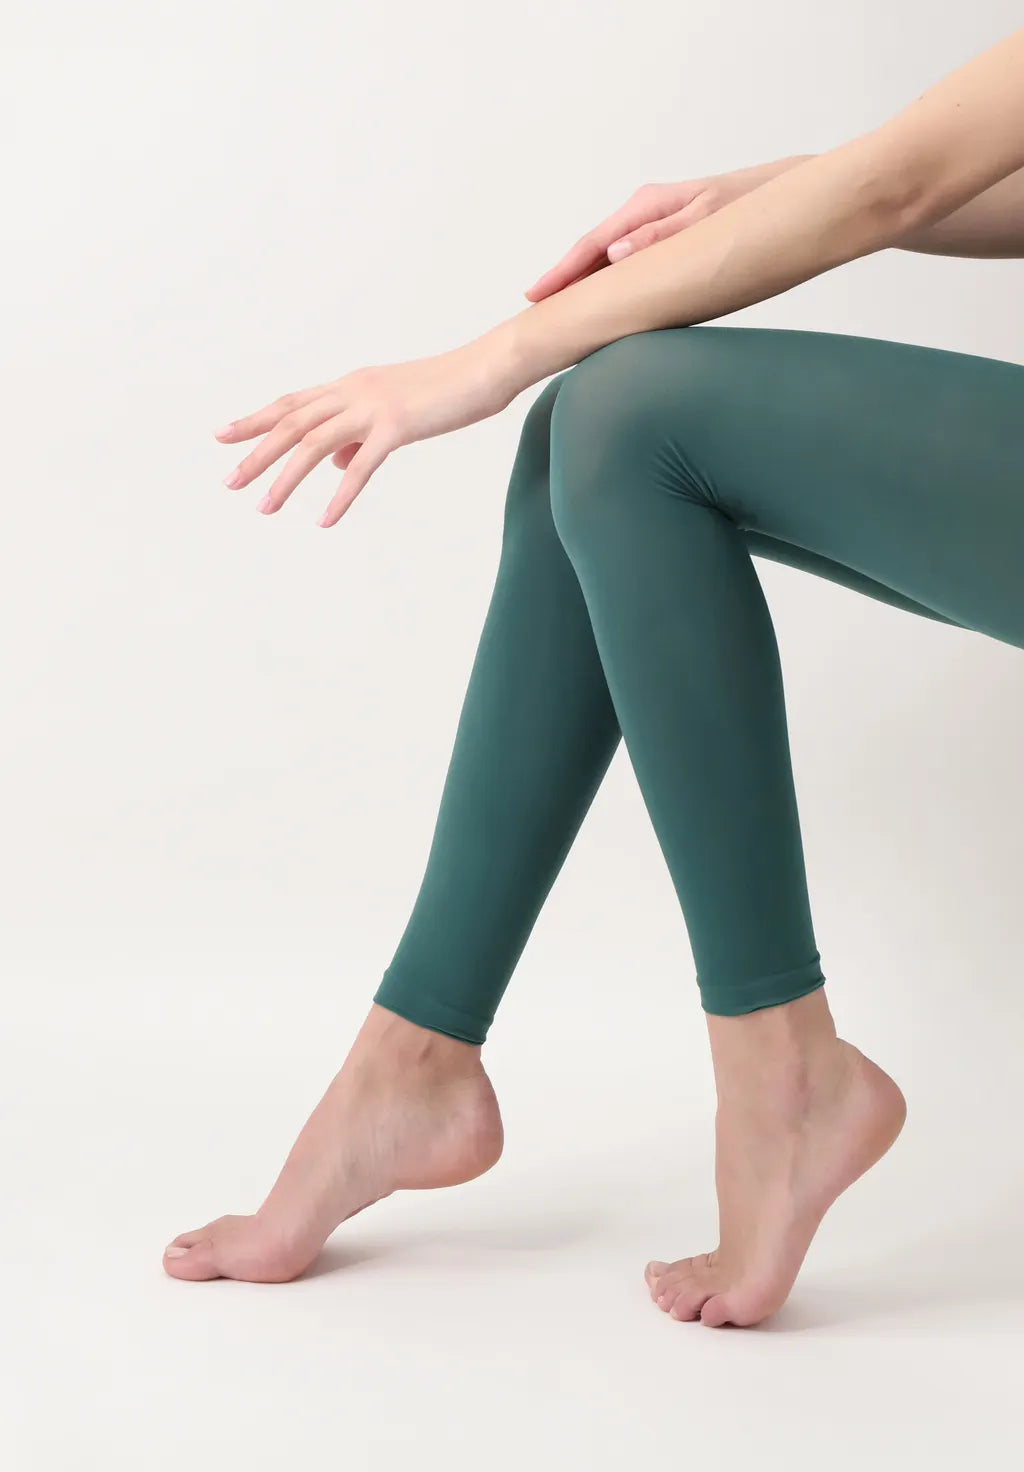 Oroblù All Colors Leggings - Green soft matte opaque footless tights with deep comfort waist band, flat seams and gusset.